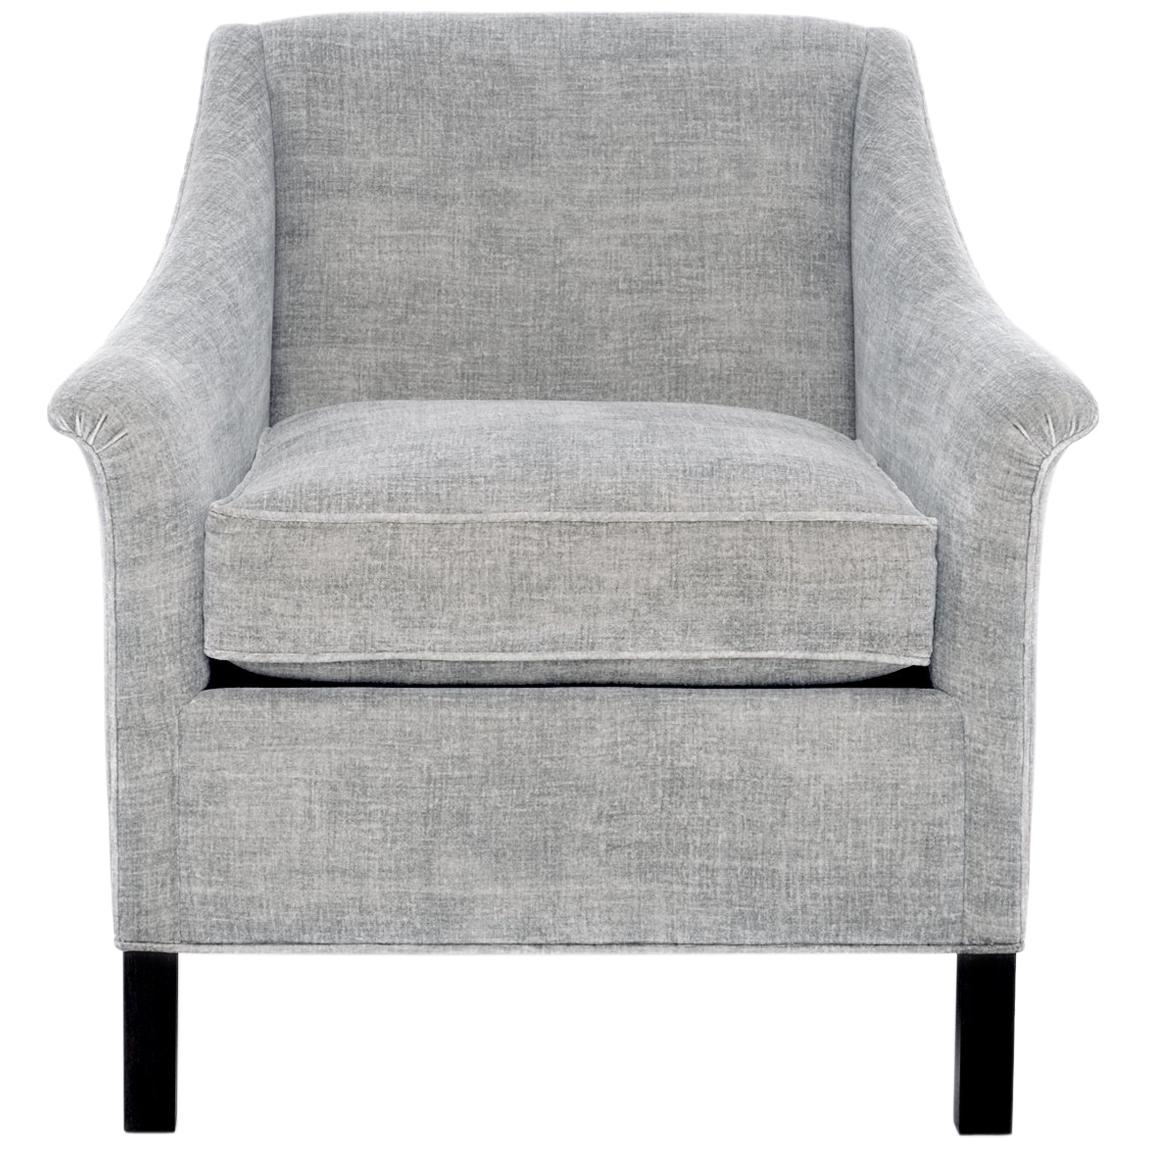 Isabelle Upholstered Chair in Wool, Vica designed by Annabelle Selldorf